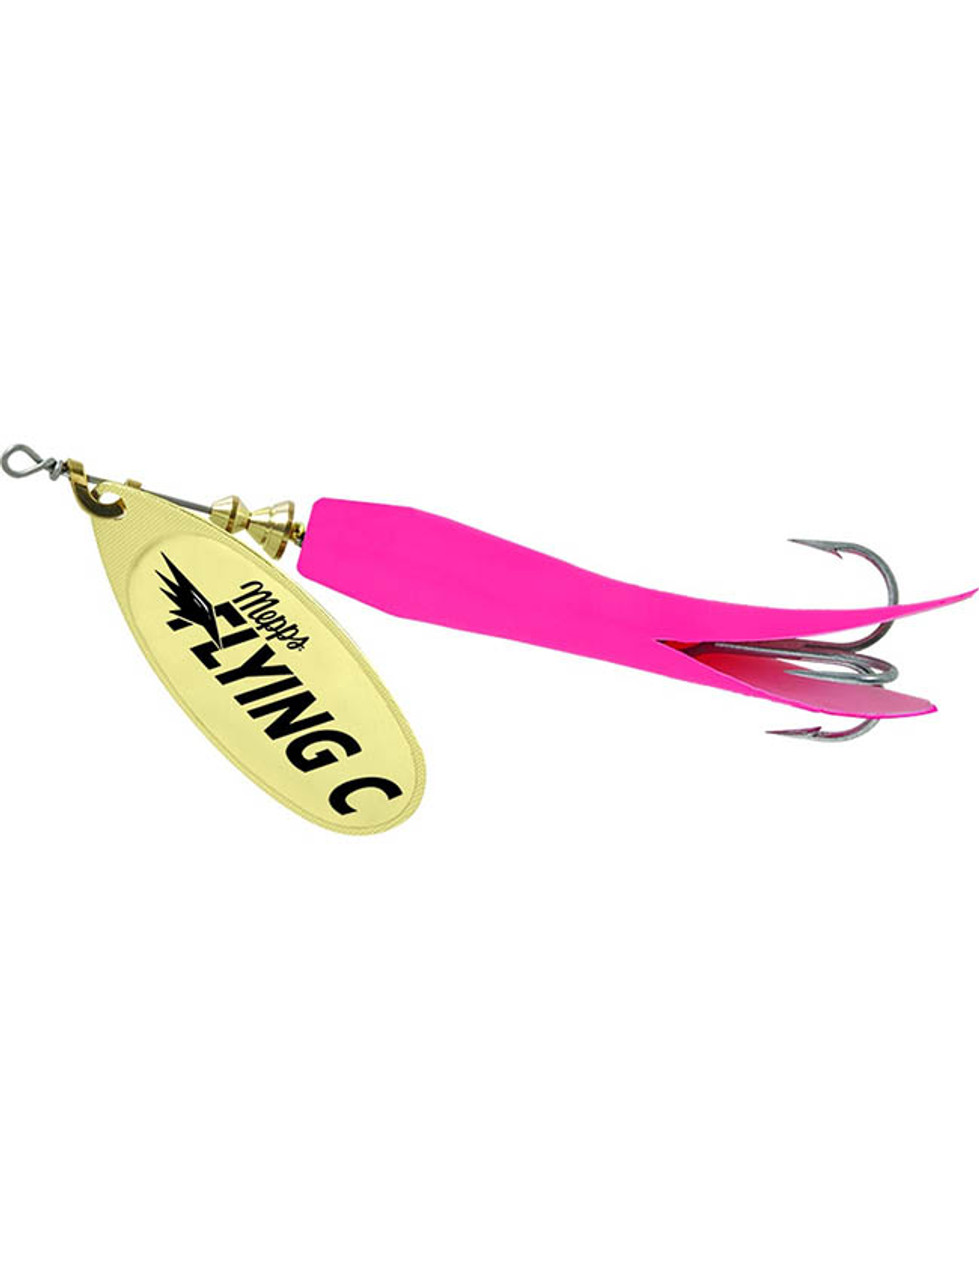 Mepps Flying C Lure - Hot Pink Sleeve & Gold Blade